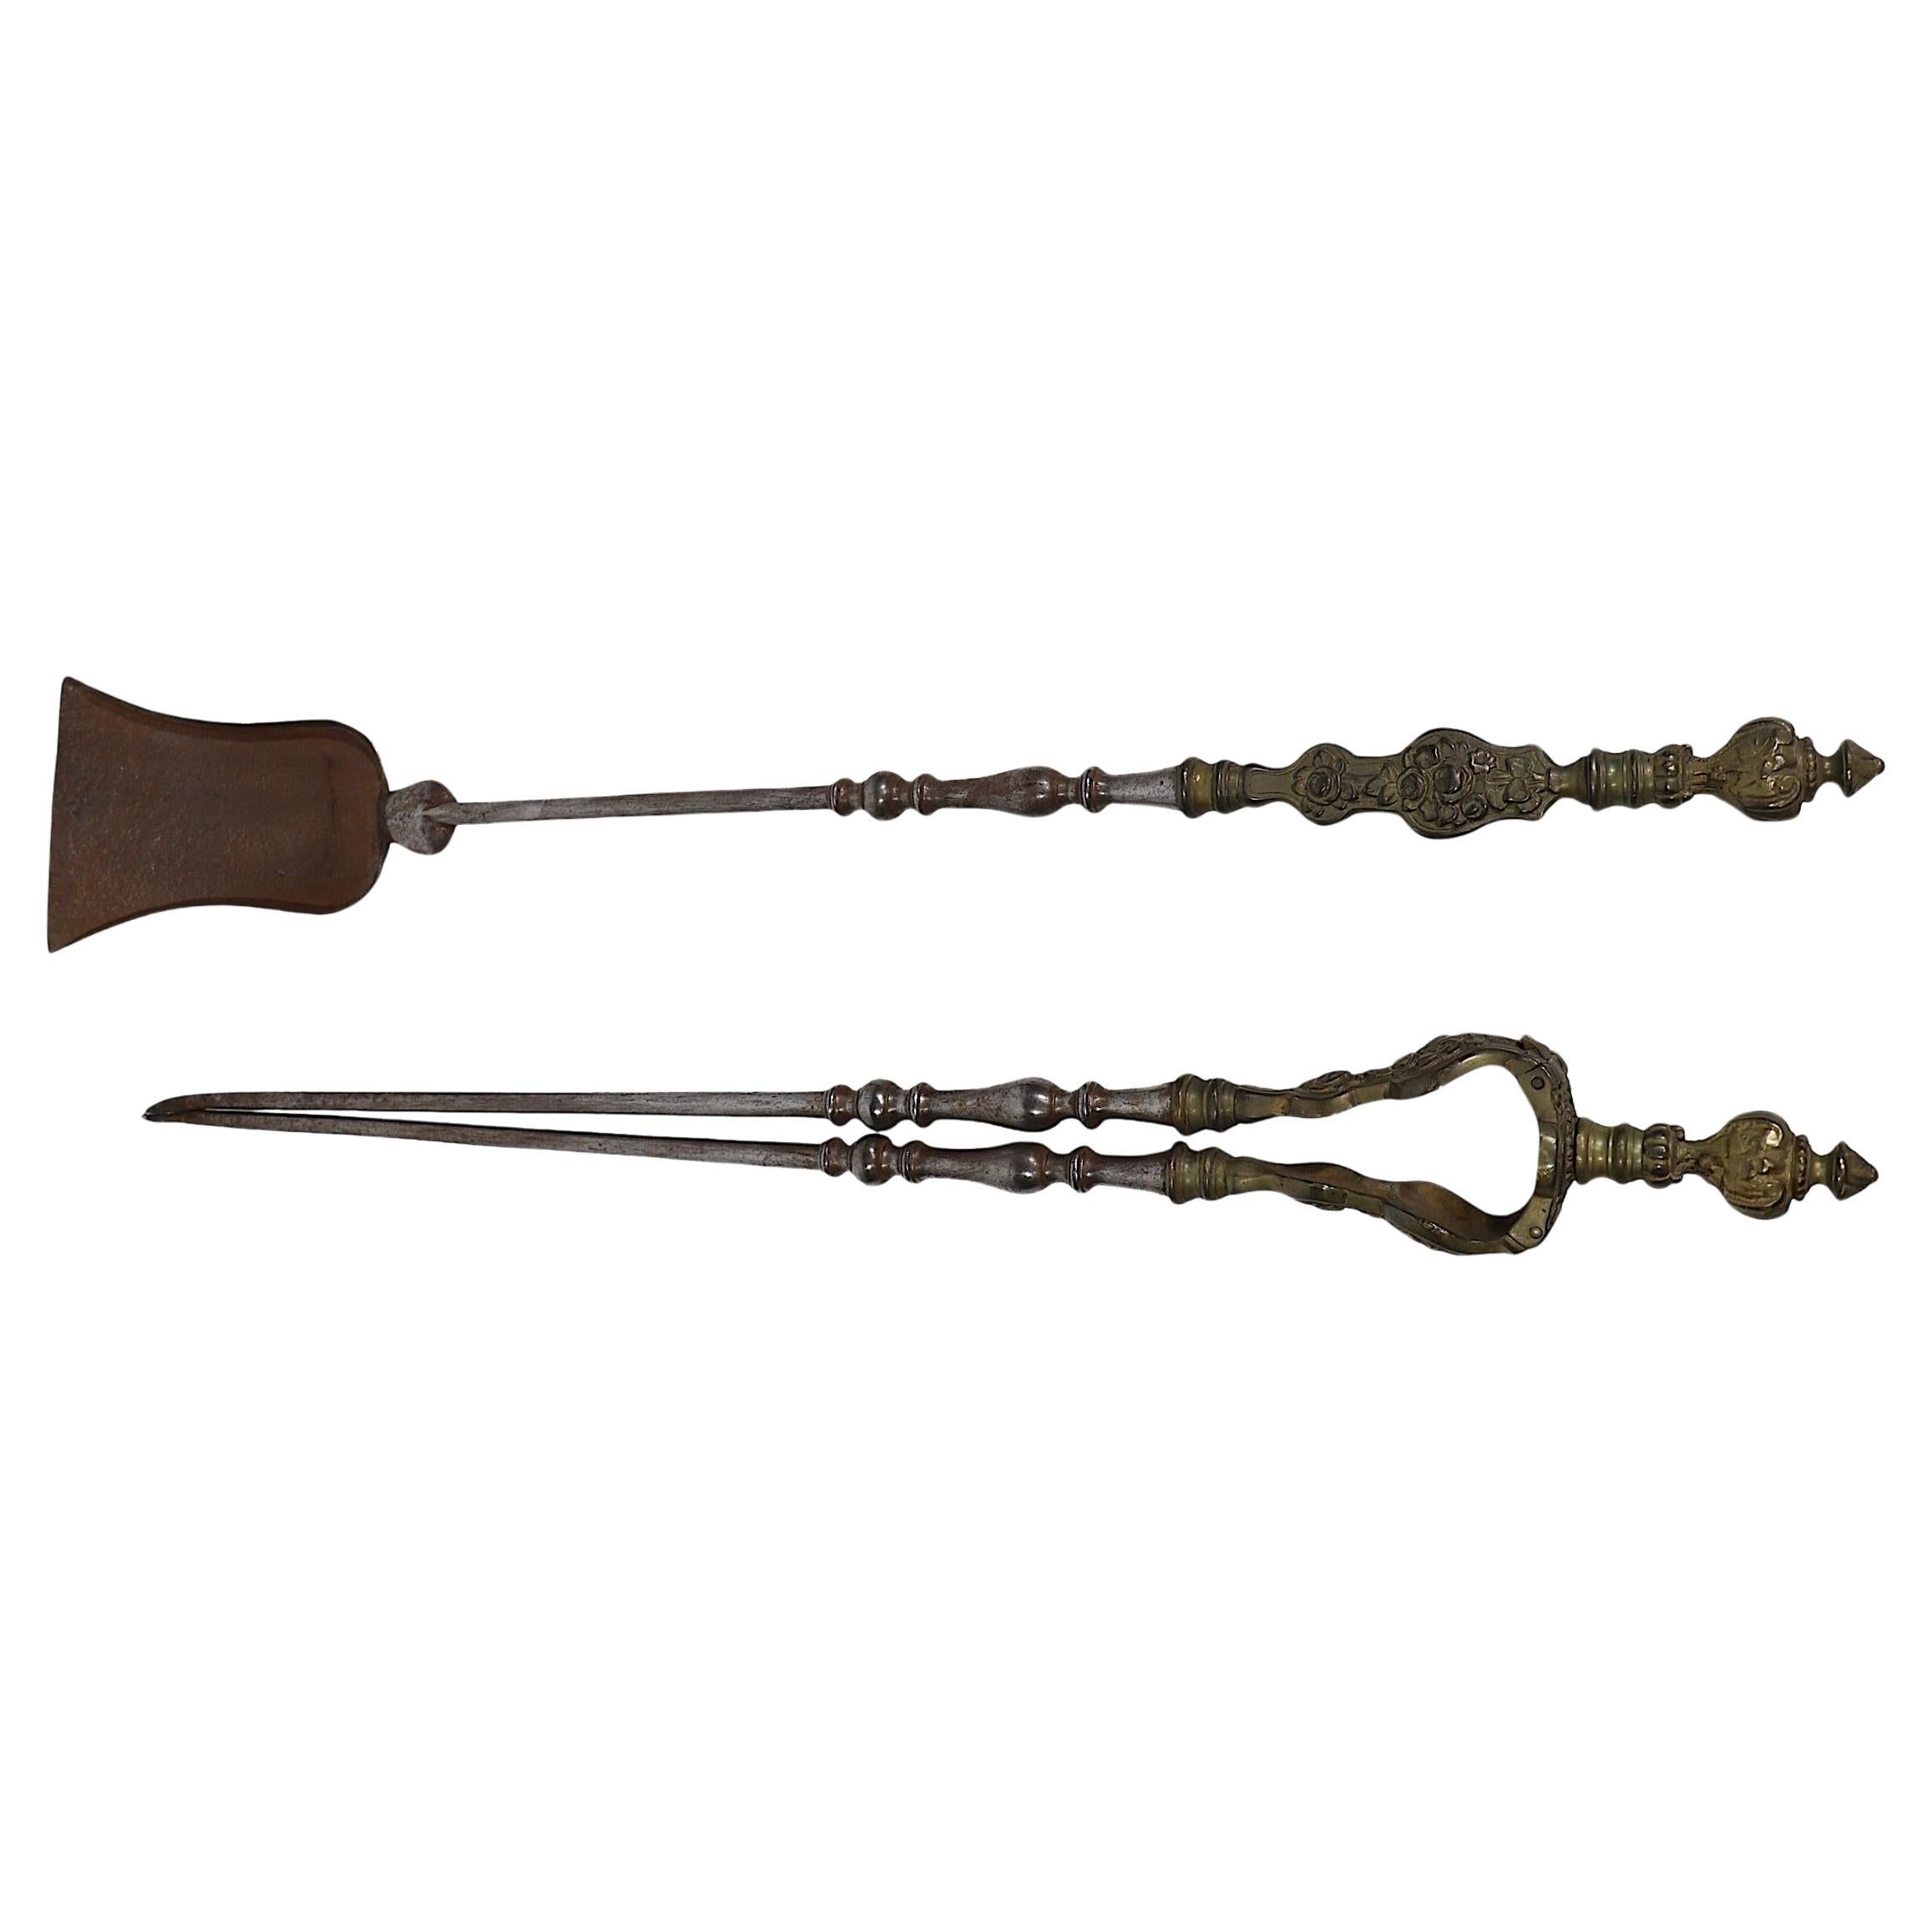 Two exquisite antique fireplace tools, a tongs, and a shovel, both having finely detailed cast brass handles, with elegant polished steel tools. 
 We especially love the jointed mechanism that the tong tool has. 
 We believe these are French in